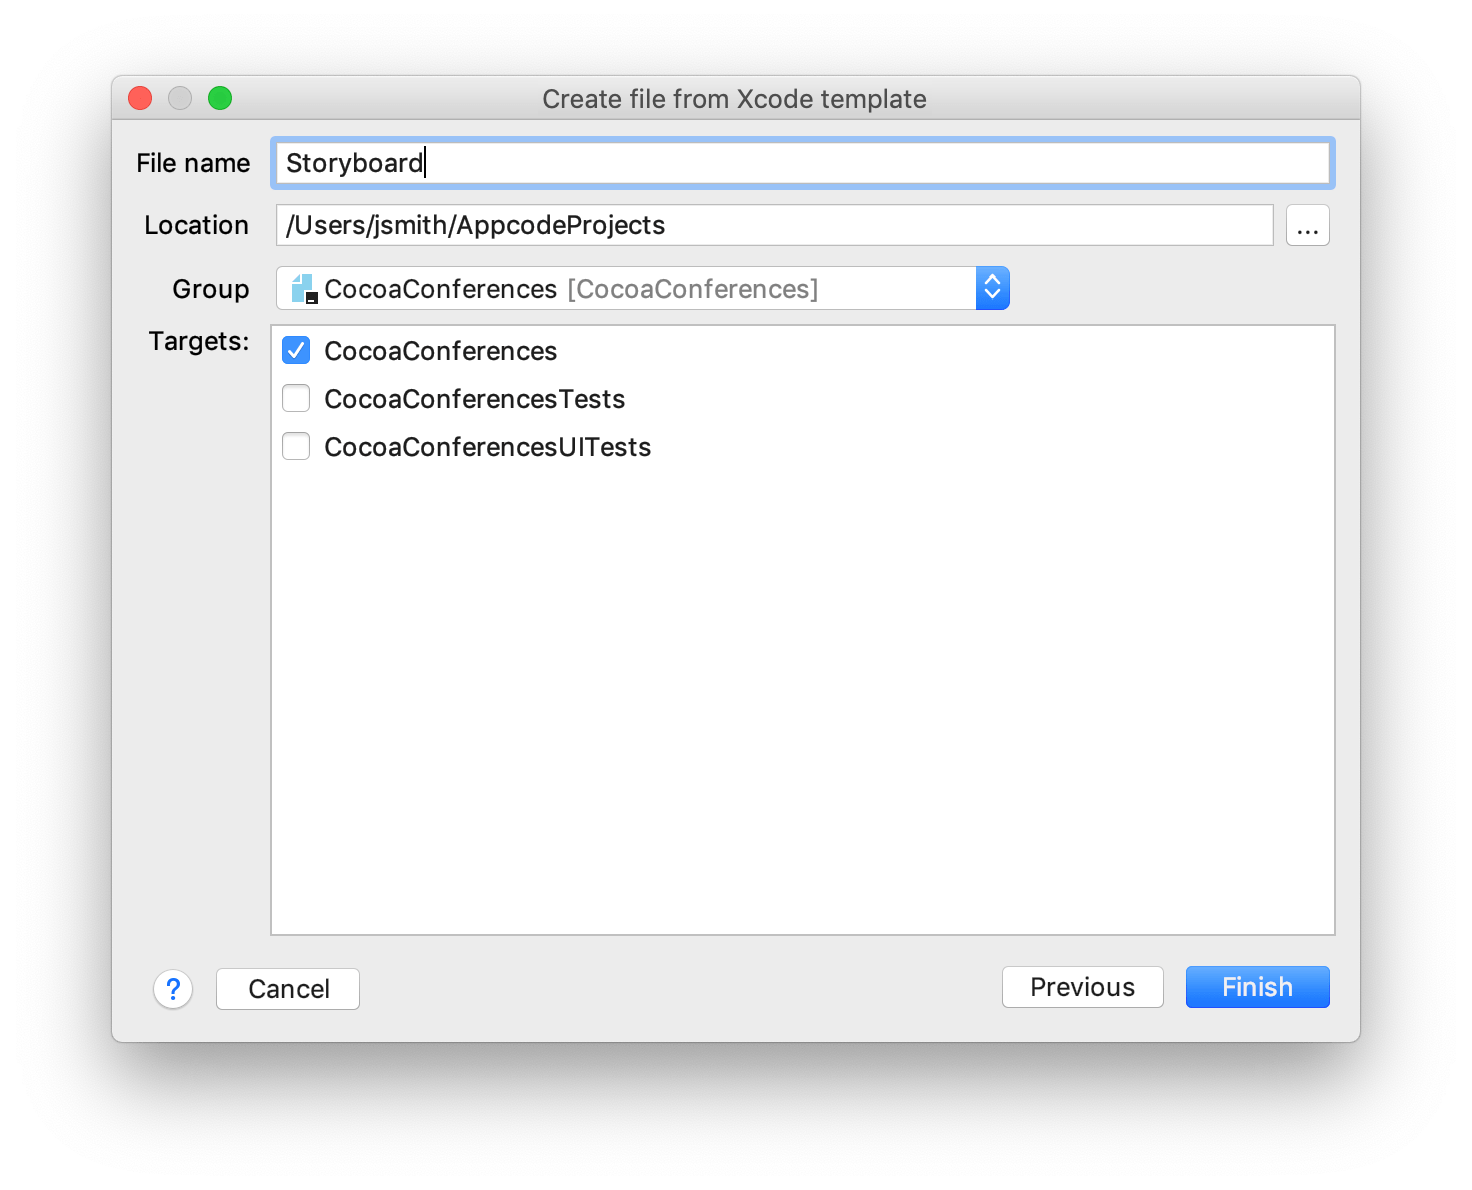 Create file from Xcode template: Step 2